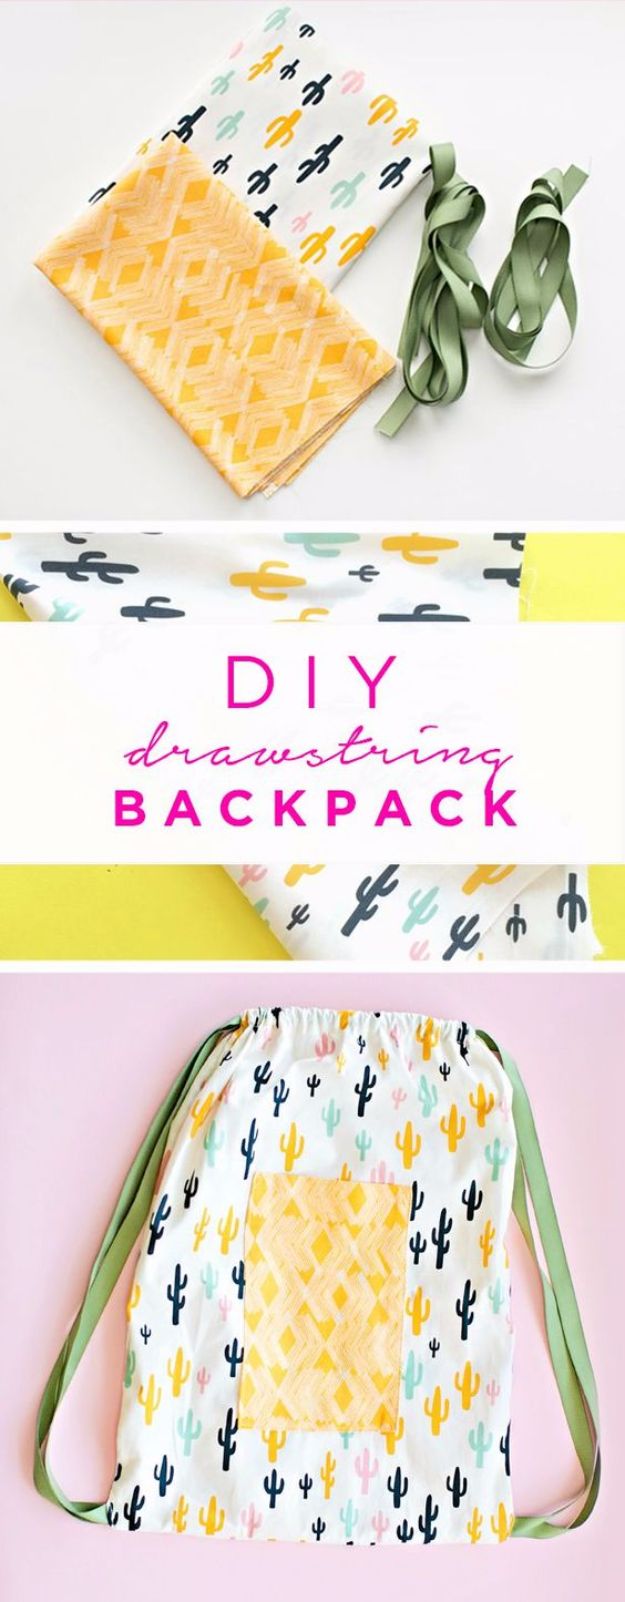 DIY School Supplies - DIY Drawstring Backpack - Easy Crafts and Do It Yourself Ideas for Back To School - Pencils, Notebooks, Backpacks and Fun Gear for Going Back To Class - Creative DIY Projects for Cheap School Supplies - Cute Crafts for Teens and Kids #backtoschool #teencrafts #kidscrafts #teen #diyideas #crafts